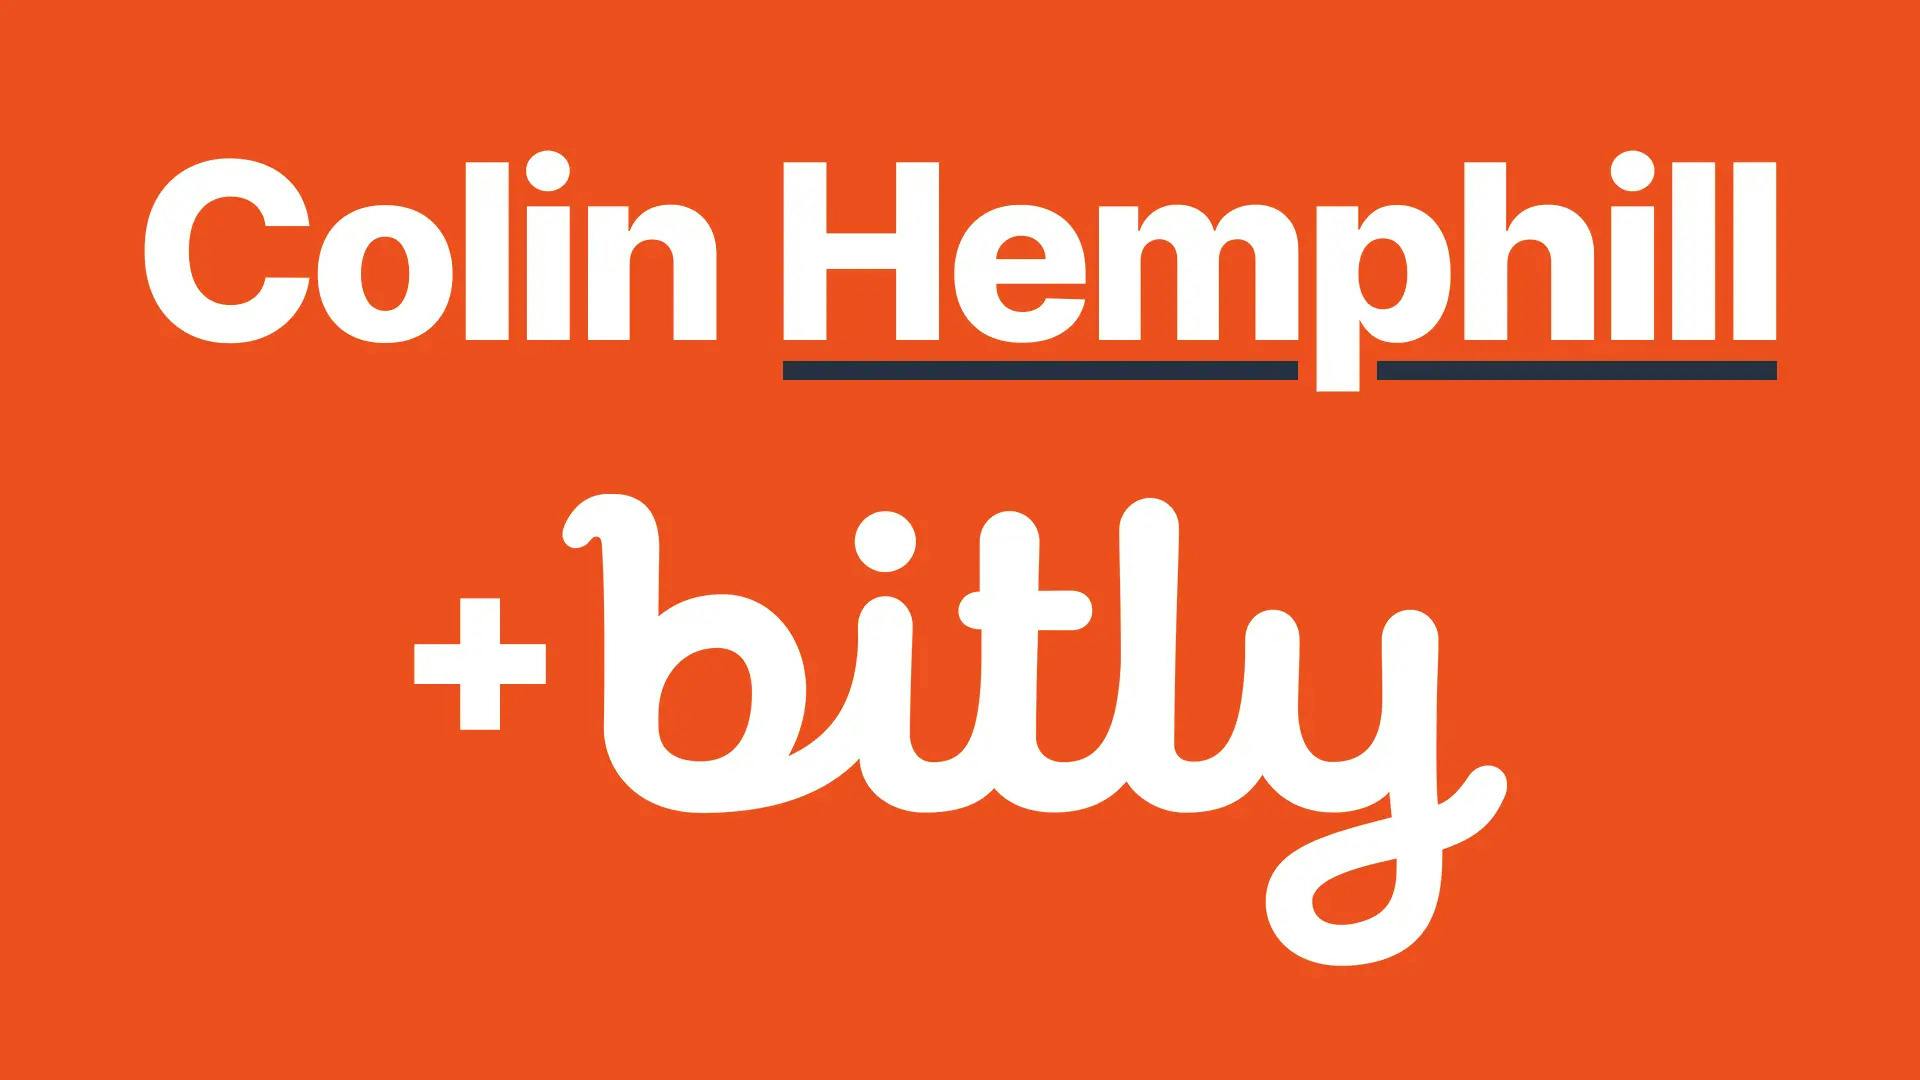 Colin Hemphill + the Bitly logo on an orange background with white text